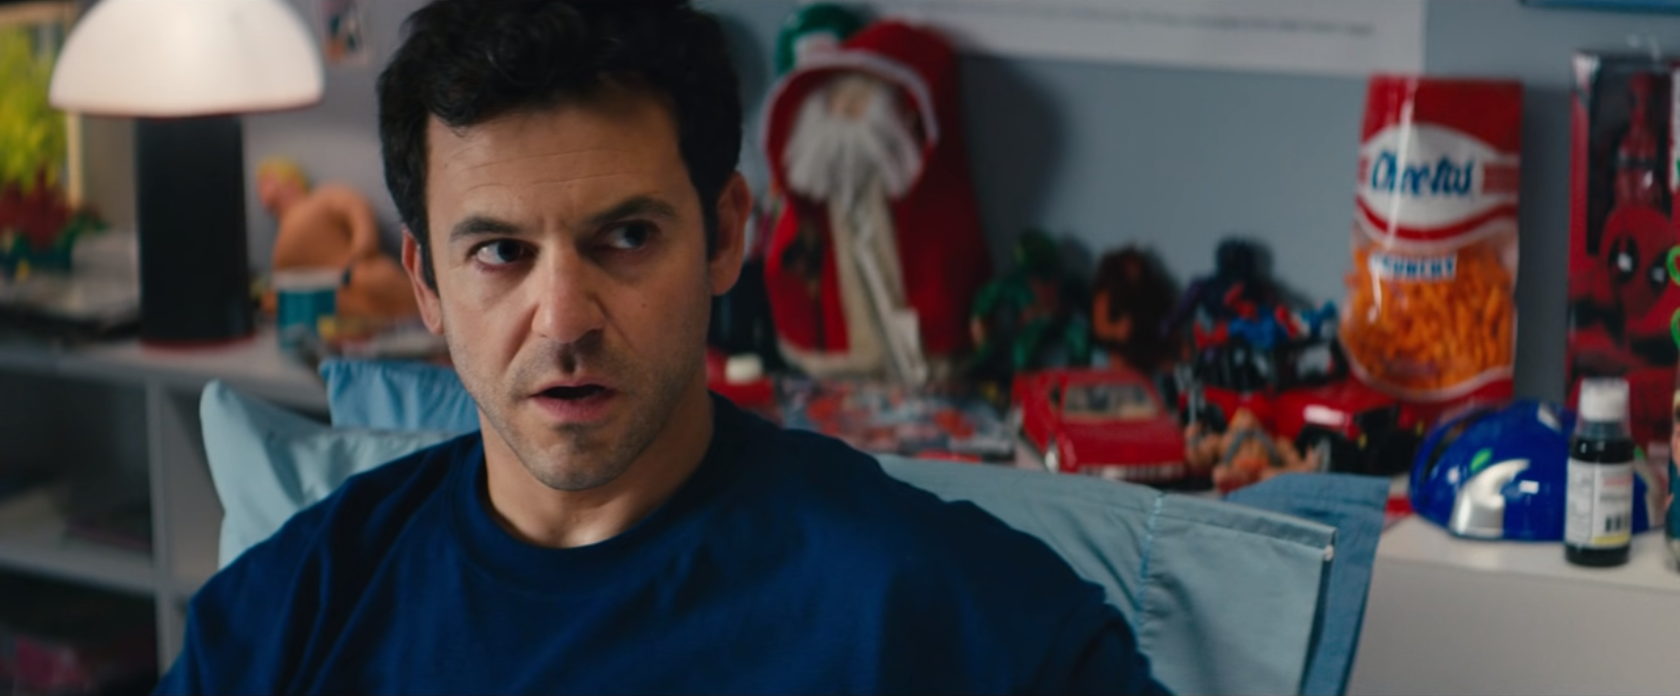 Fred Savage in "Once Upon a Deadpool"